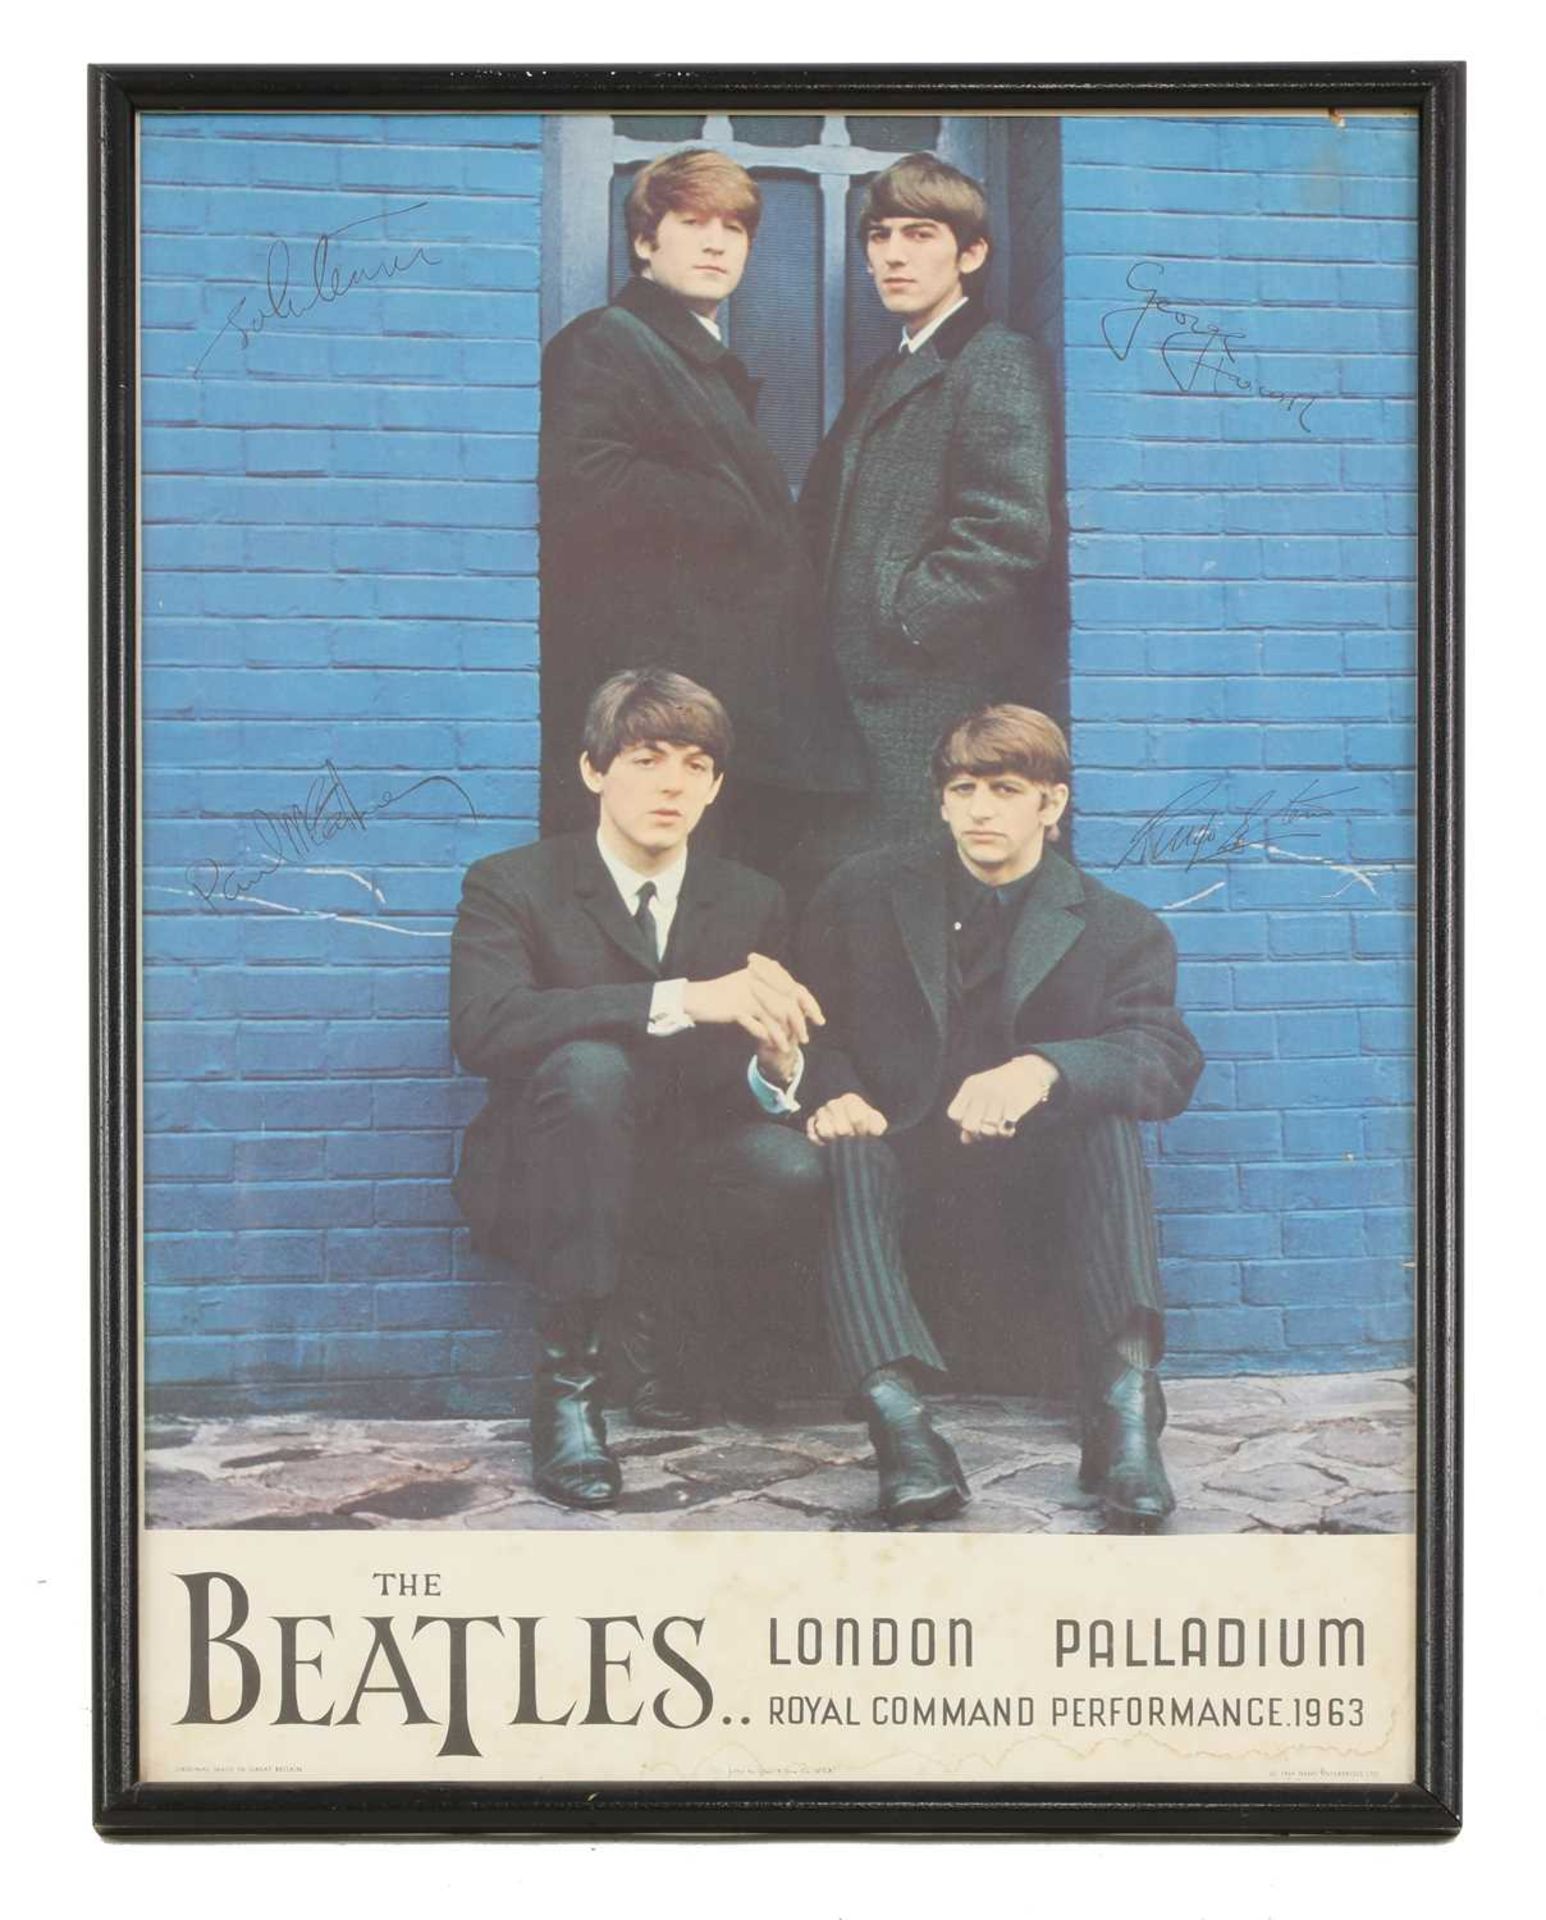 Two Beatles posters, - Image 2 of 2